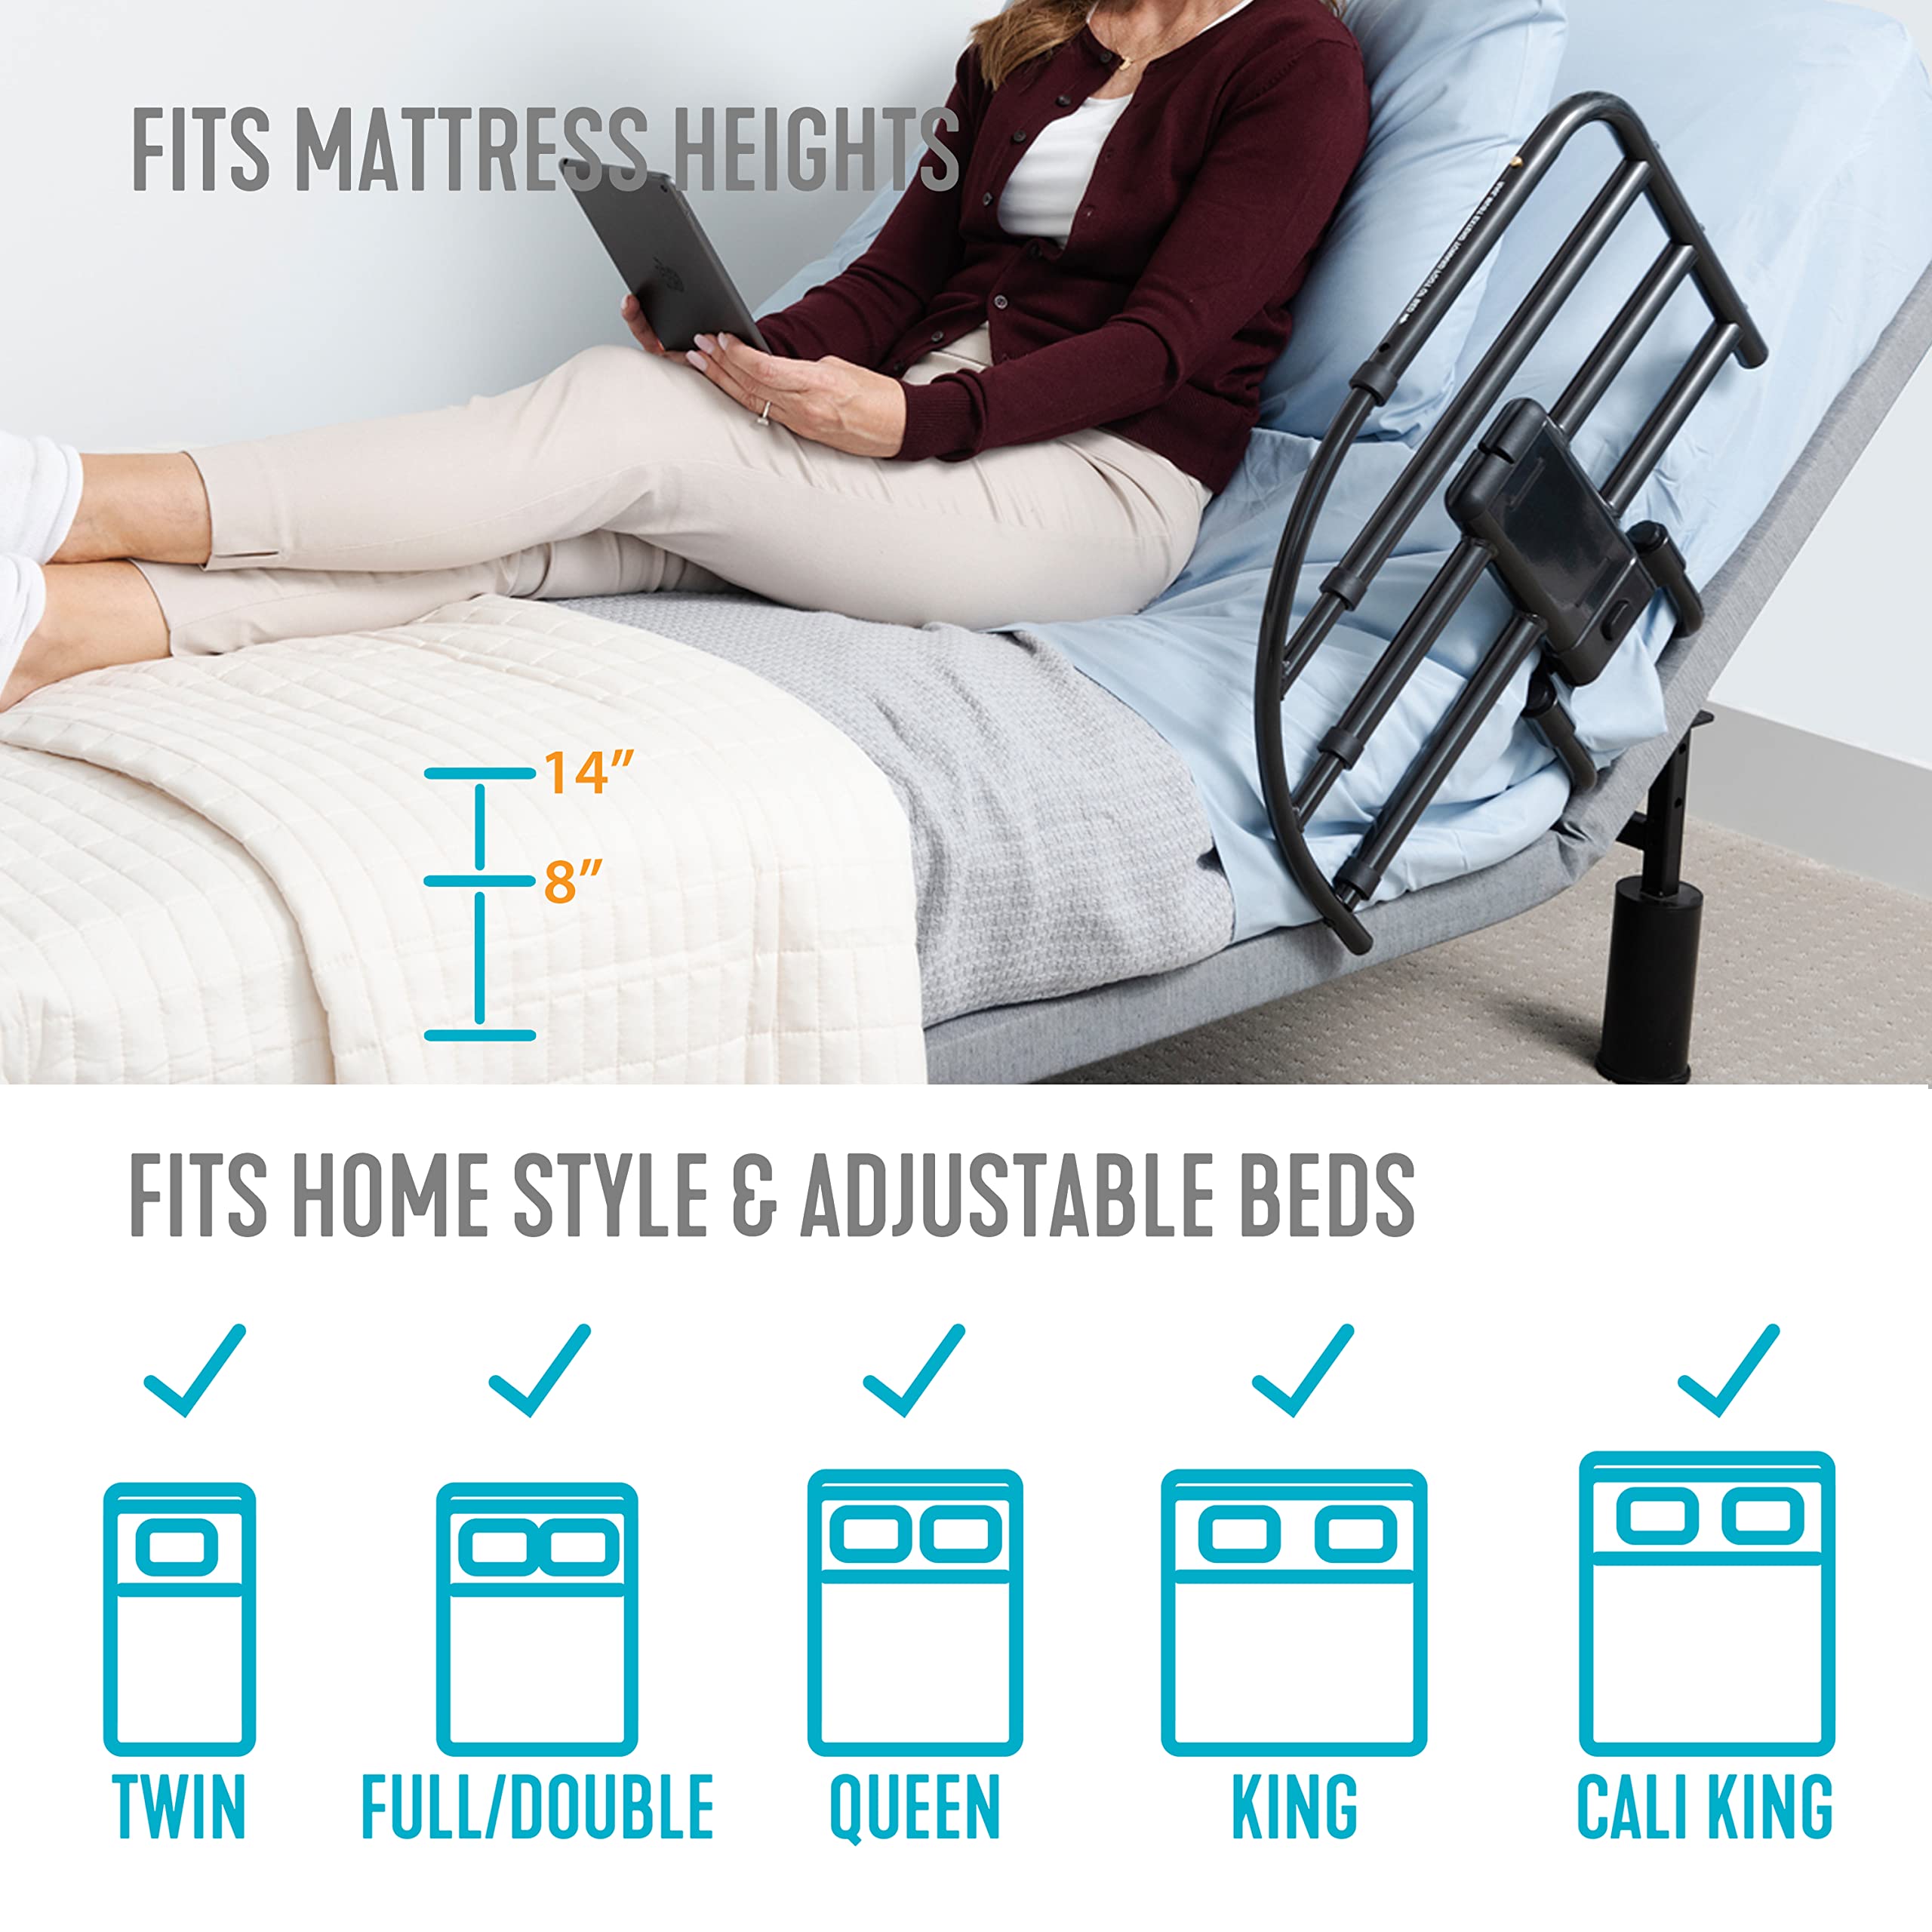 Able Life Click-N-Go Extendable Bed Rail, Removable Bed Handle for Elderly, Safe and Easy to Use Adjustable Assist Rail for Seniors, Prevents Falls, Fits Most King, Queen, Full, and Twin Beds